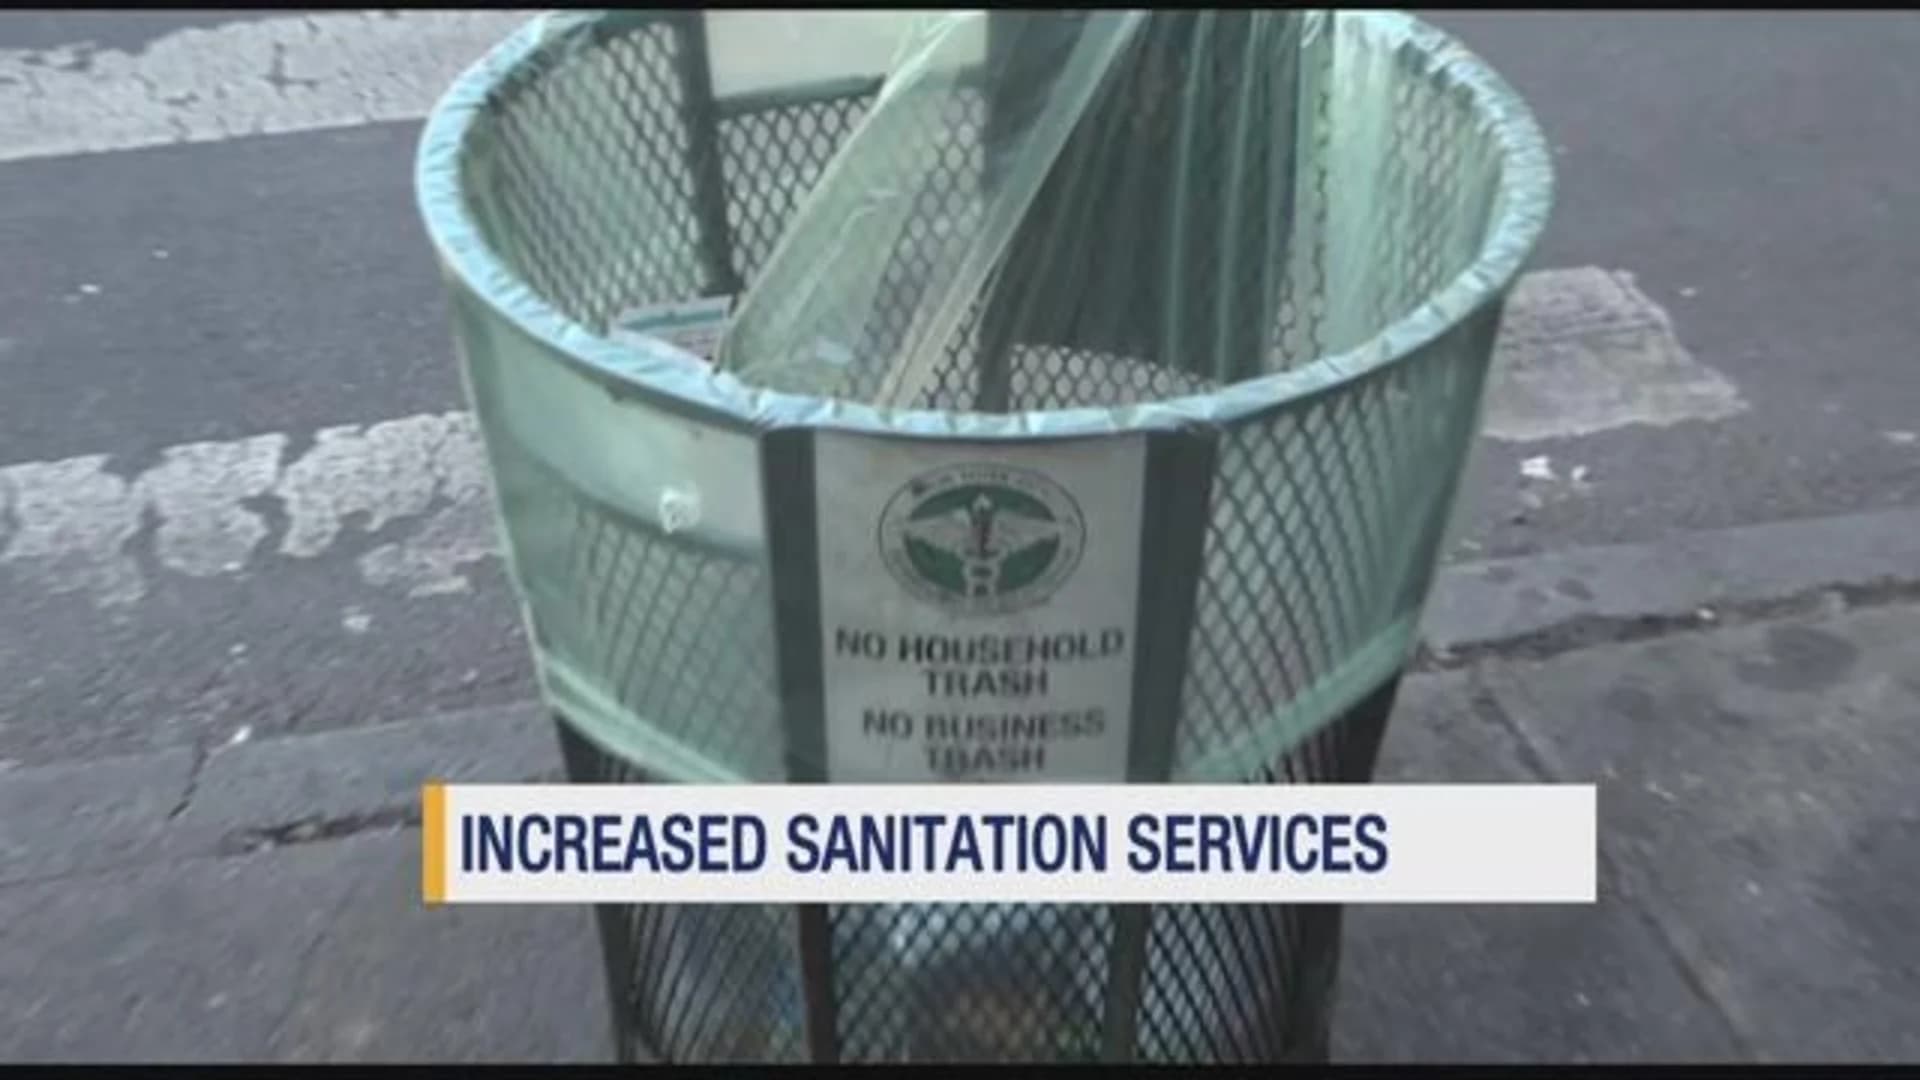 Sanitation services boosted for some BK businesses